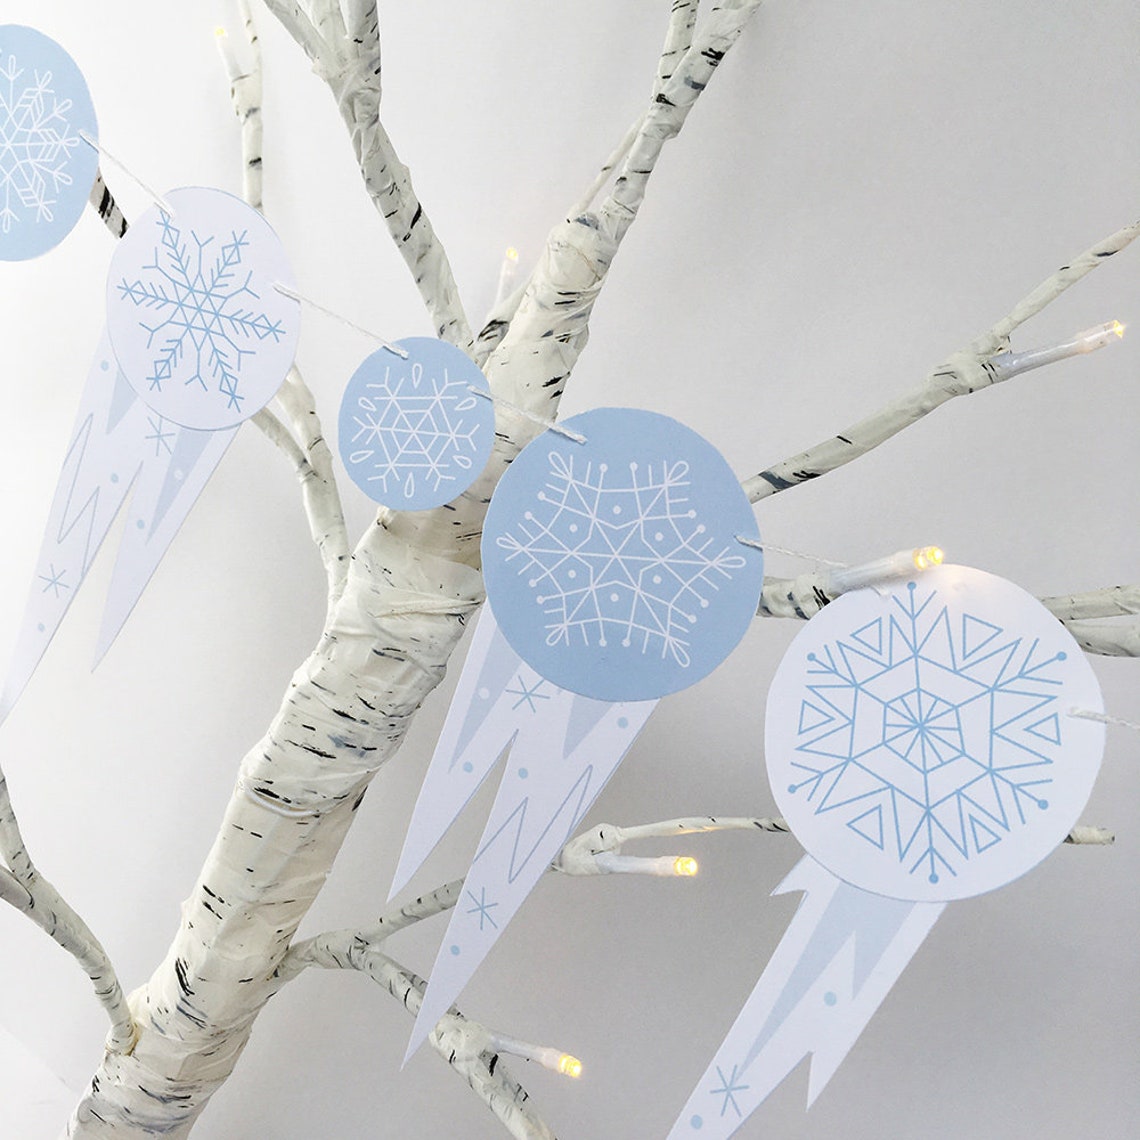 Printable Snowflakes and Icicles Garland and party decor PDF | Etsy